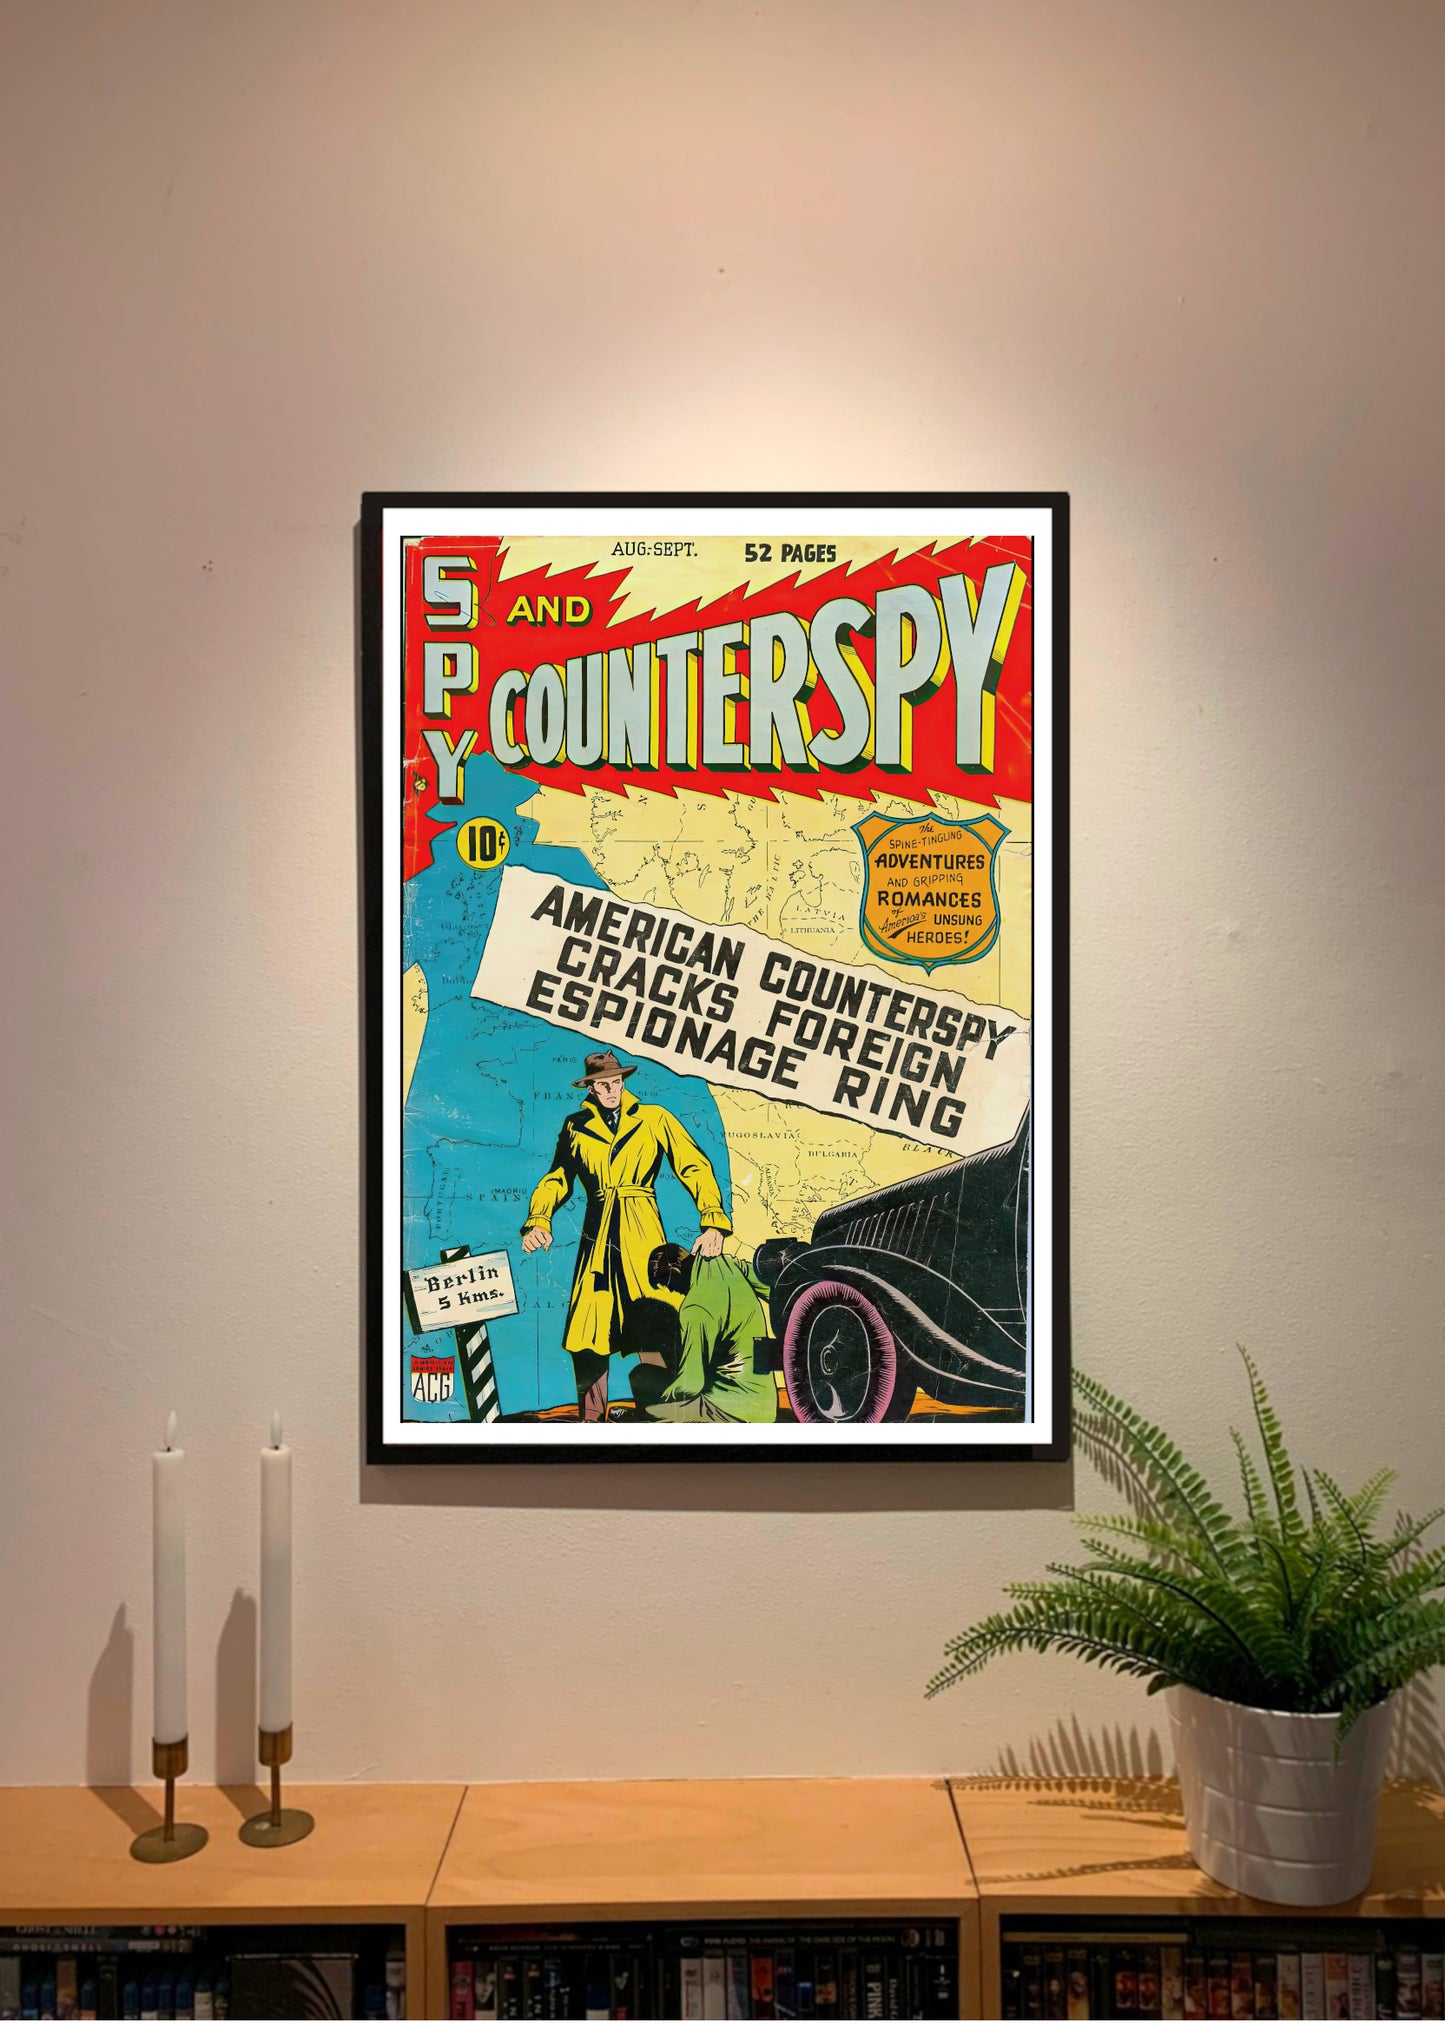 #940 Spy and counterspy